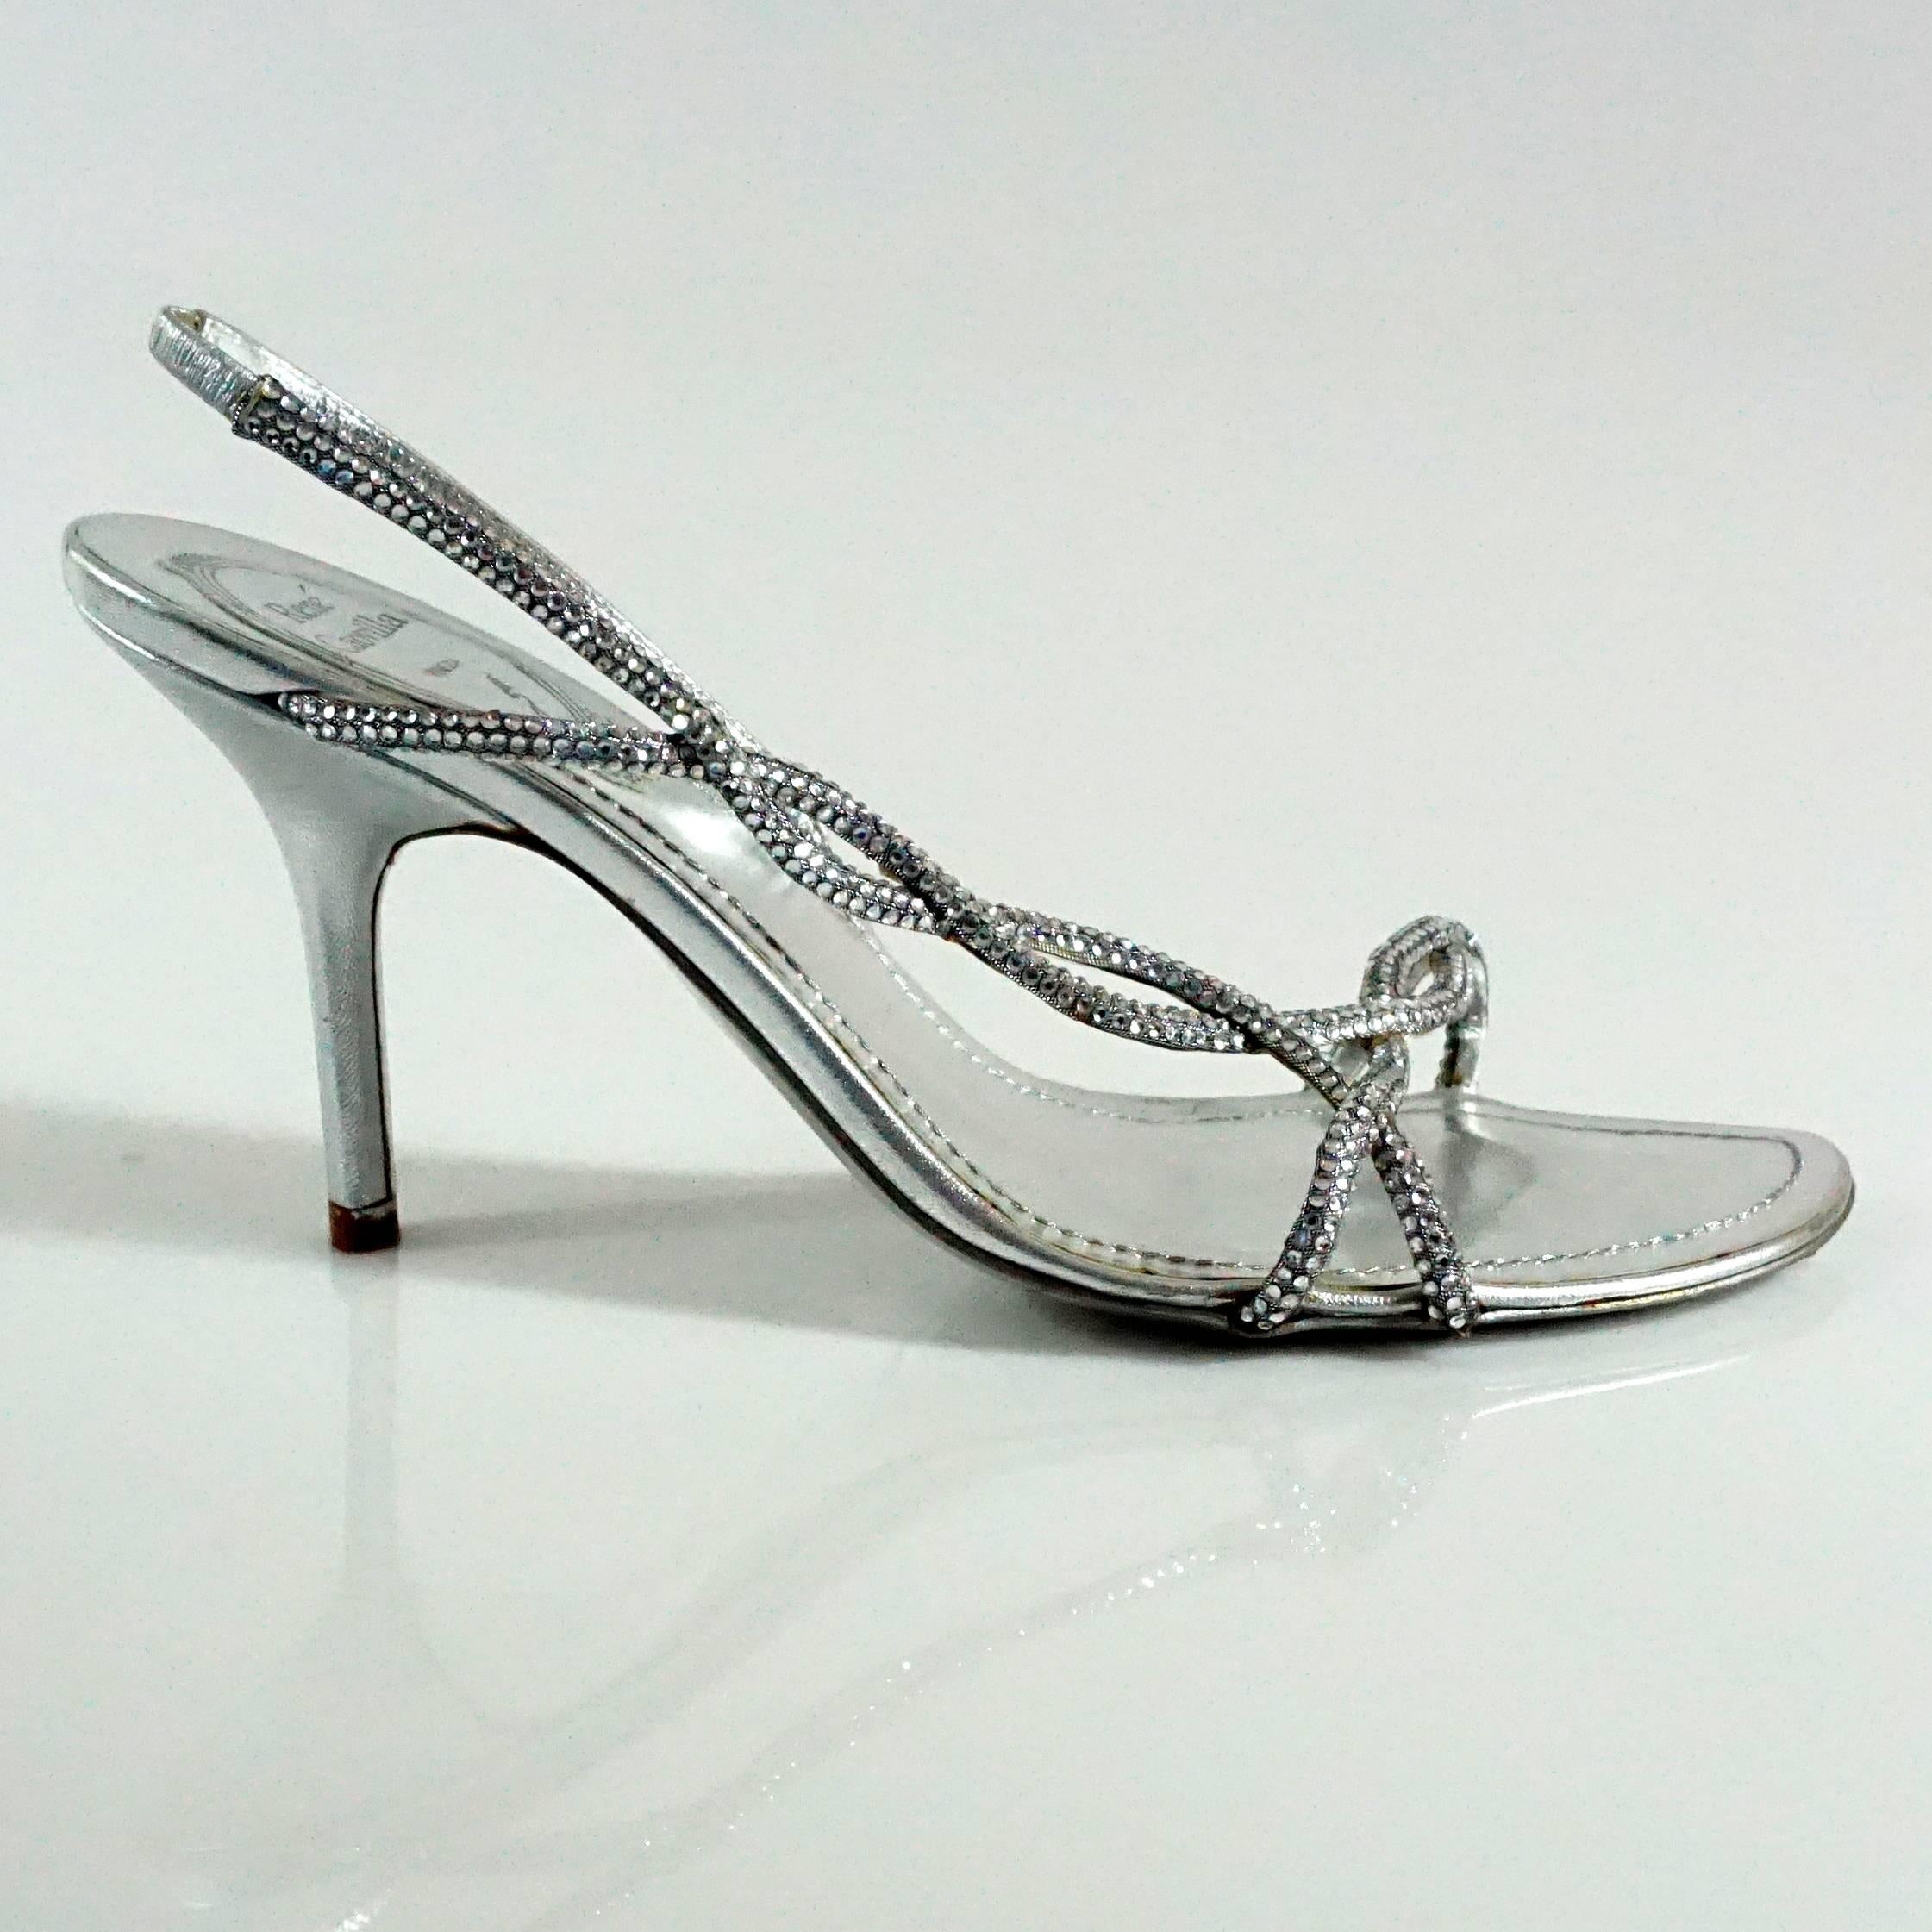 Rene Caovilla Silver Rhinestone Sandals-37  These beautiful sandals are very elegant filled with rhinestones throughout the straps, and have minor wear consistent with age. Heel height 3.5